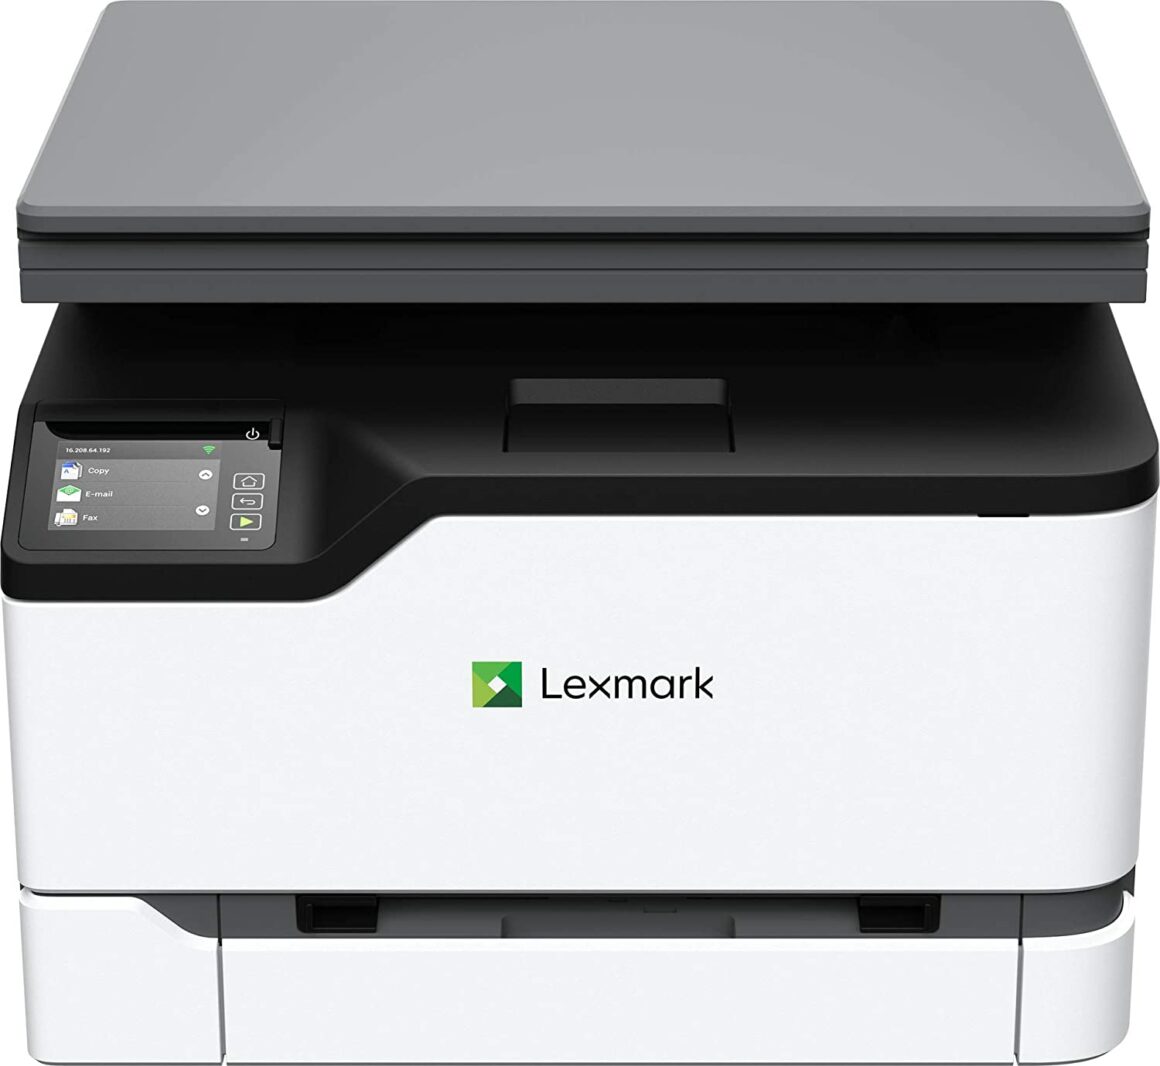 Lexmark-MC3224dwe-Color-Multifunction-Laser-Printer-with-Print-Copy-Scan-and-Wireless-Capabilities-Two-Sided-Printing-with-Full-Spectrum-Security-